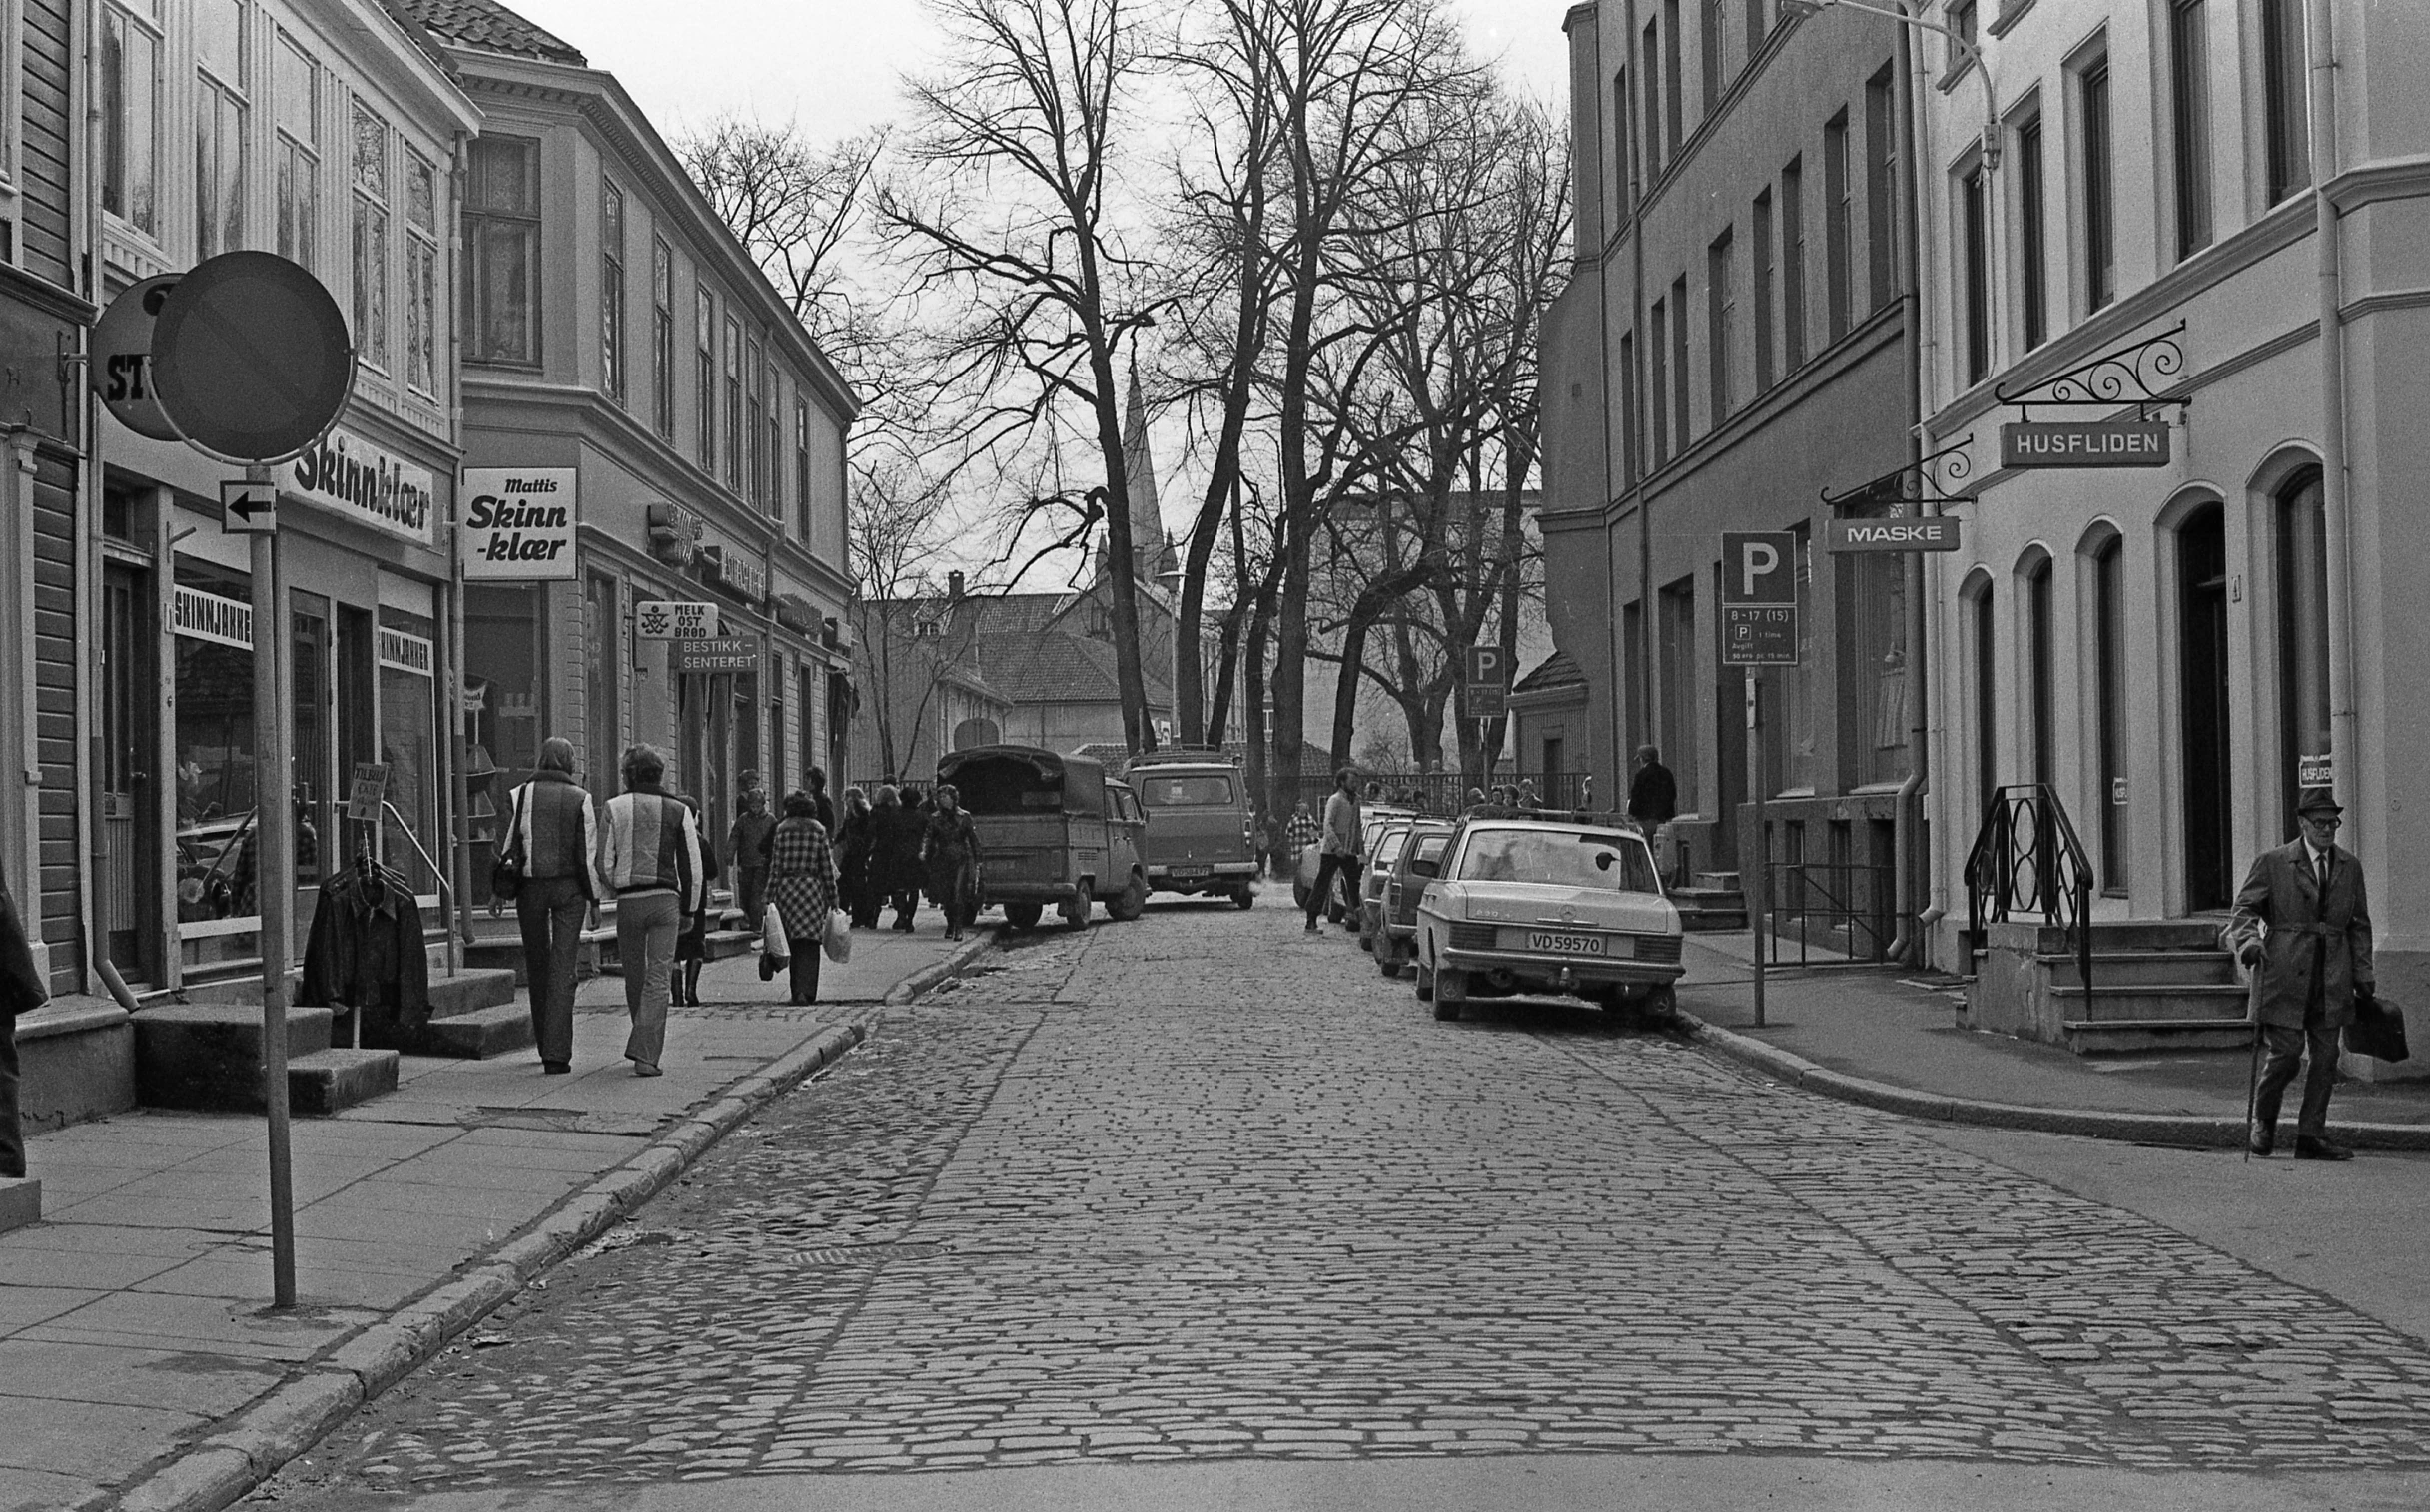 people and vehicles on a bricked road in black and white